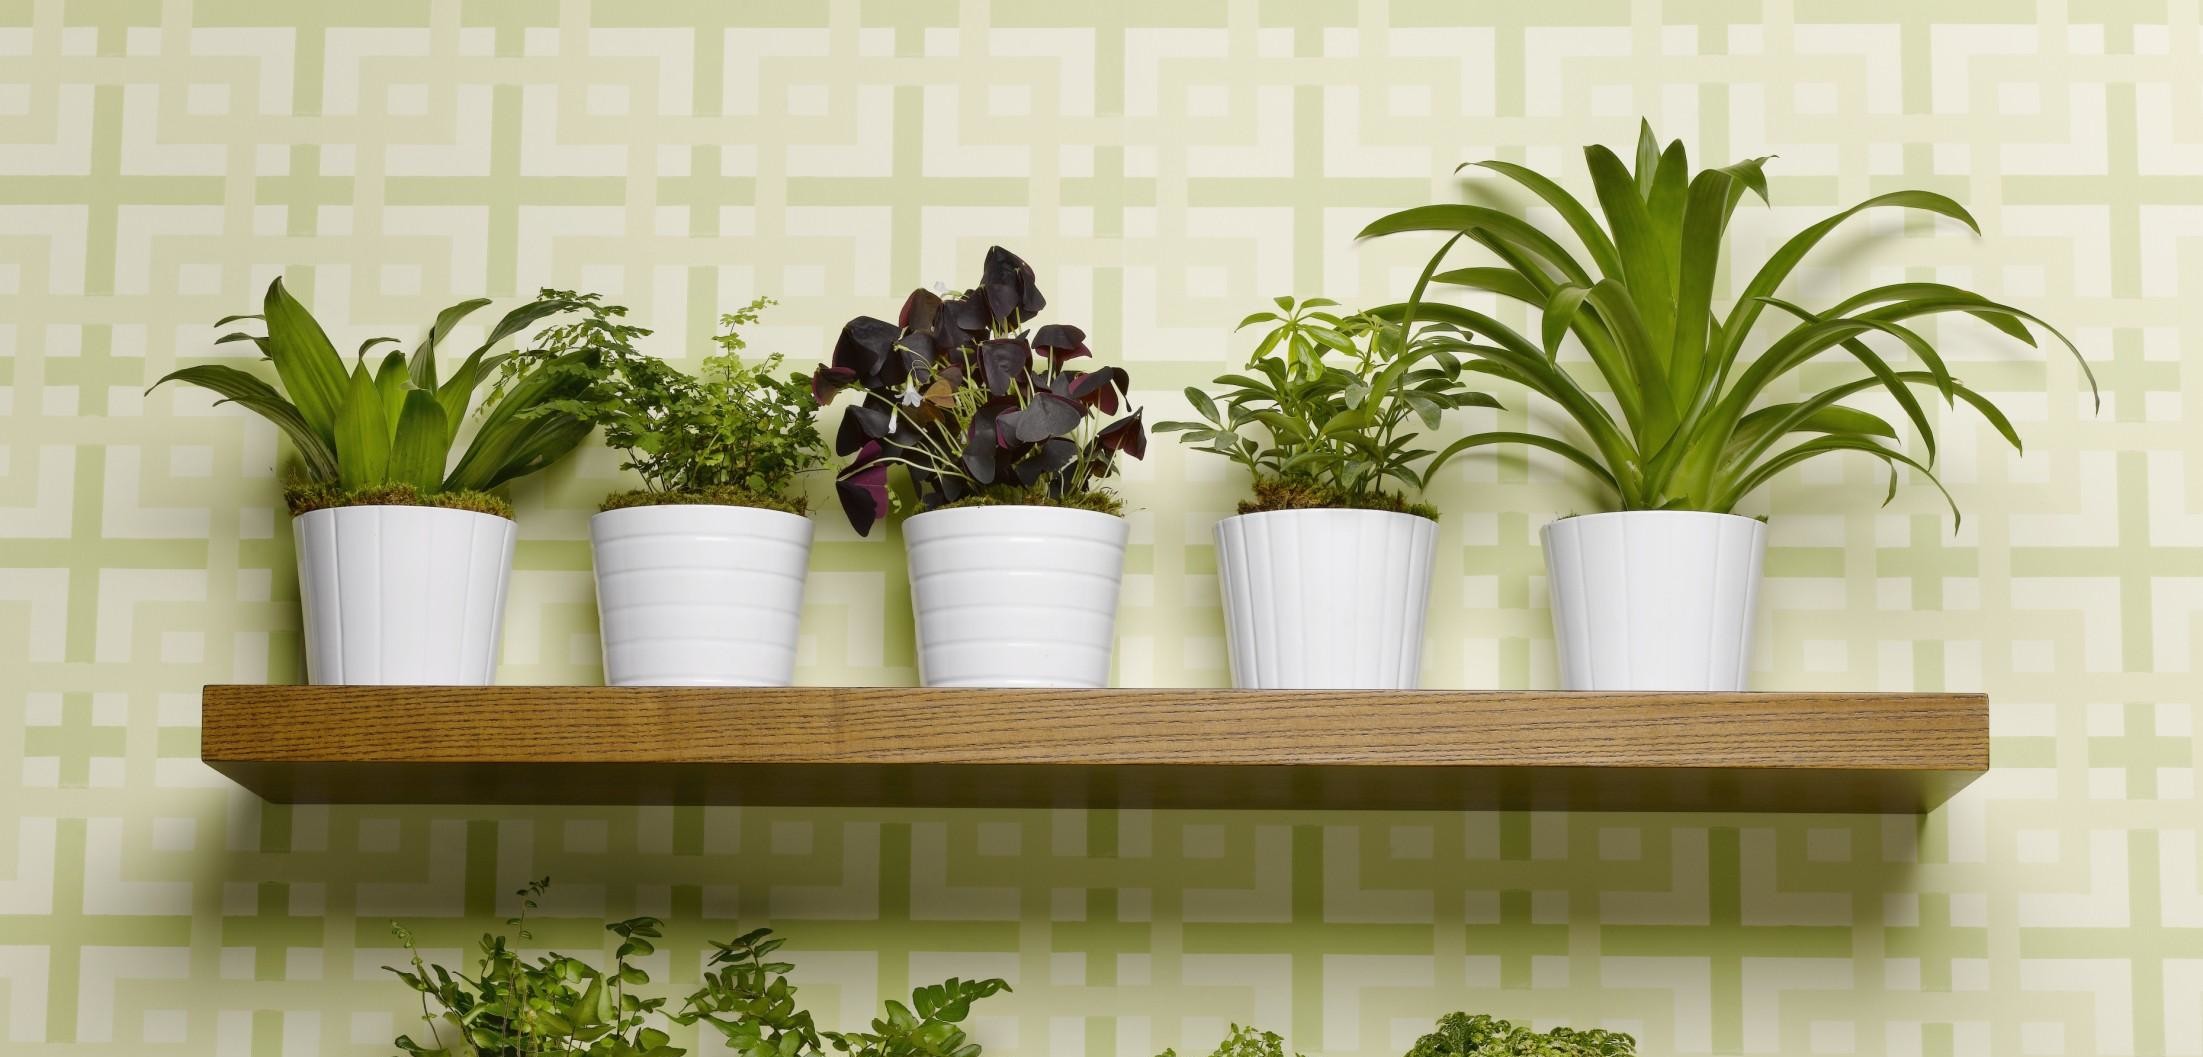 Natural Indoor Air Purification with Plants: Enhance Your Home's Interior with Plant-Based Air Filtration